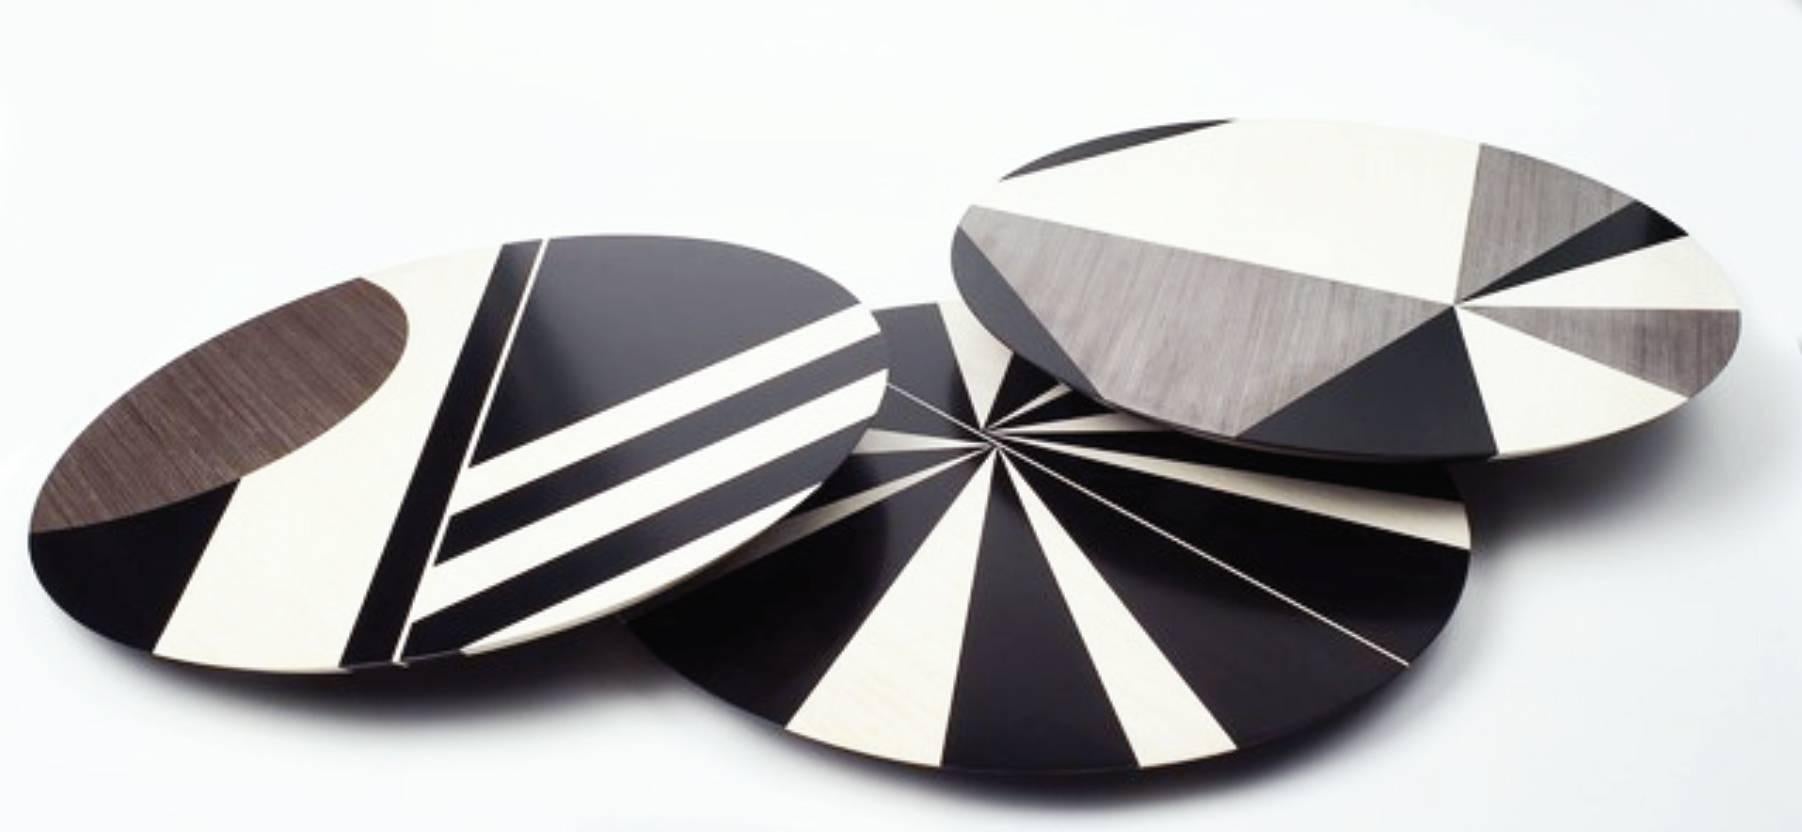 Wood marquetry Lazy Susan in black poplar and bleached gmelina. Sunburst pattern shown above available. 